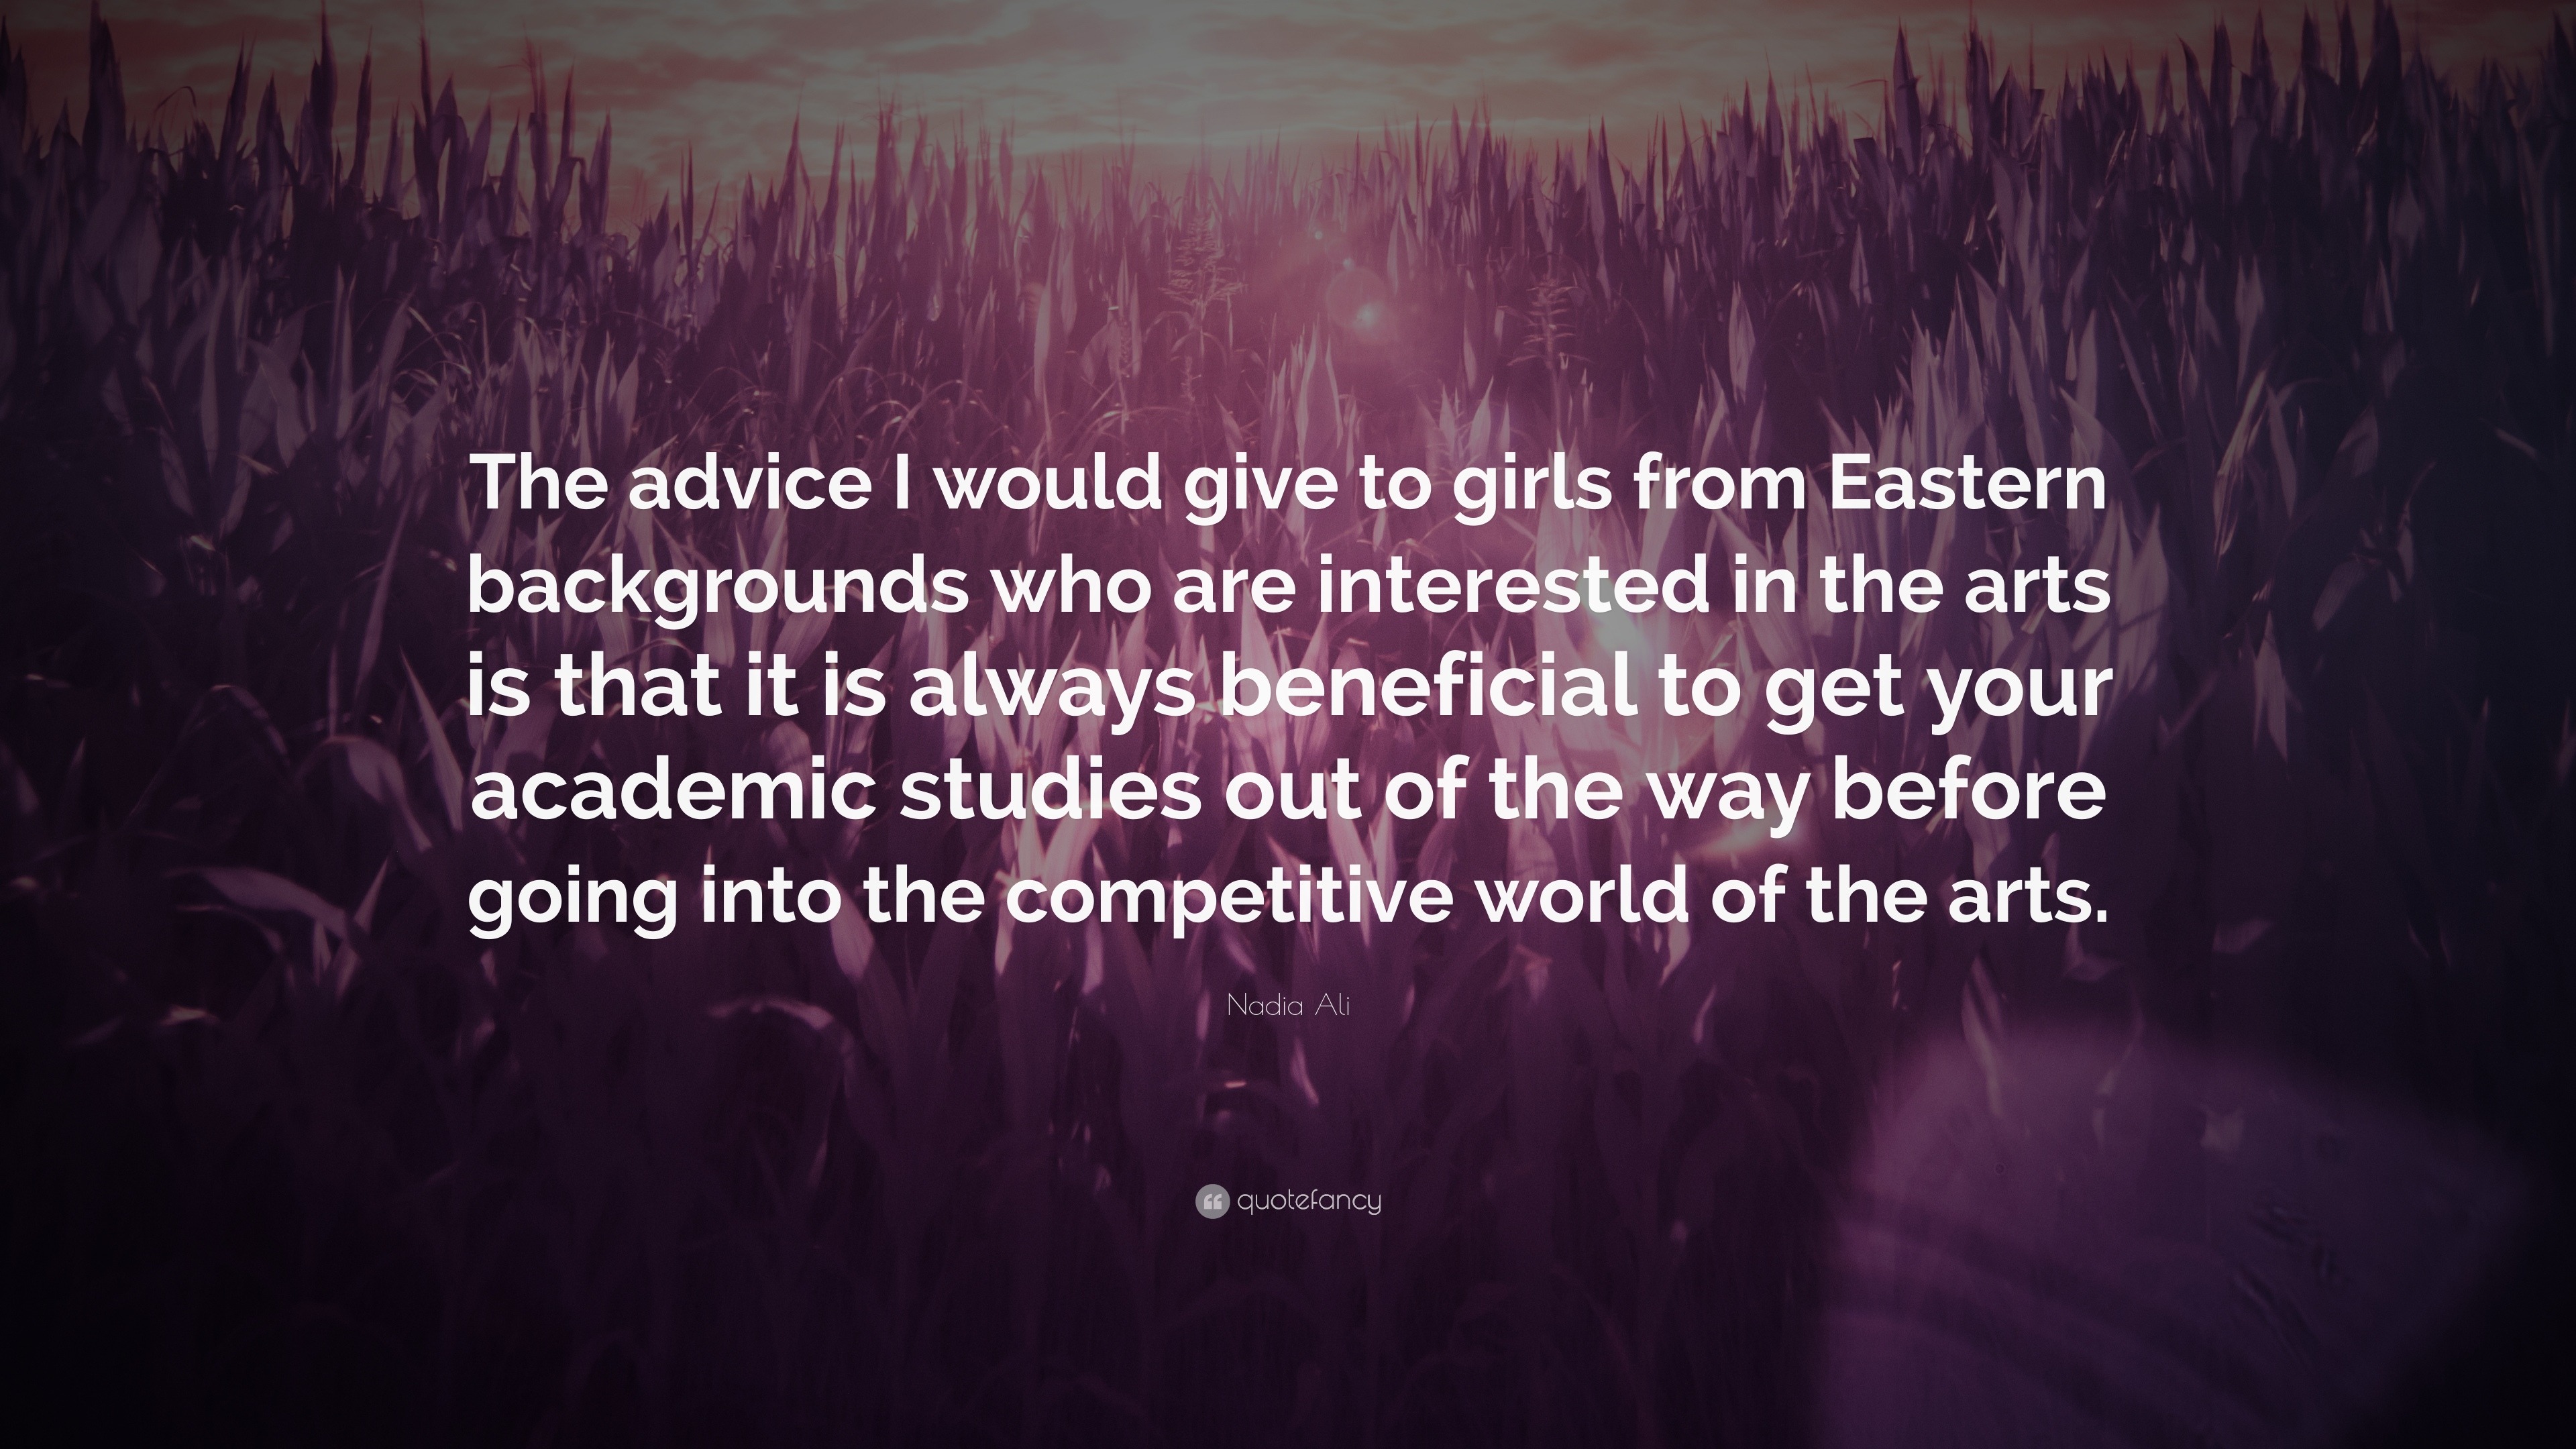 Nadia Ali Quote: “The advice I would give to girls from Eastern backgrounds  who are interested in the arts is that it is always beneficial...”